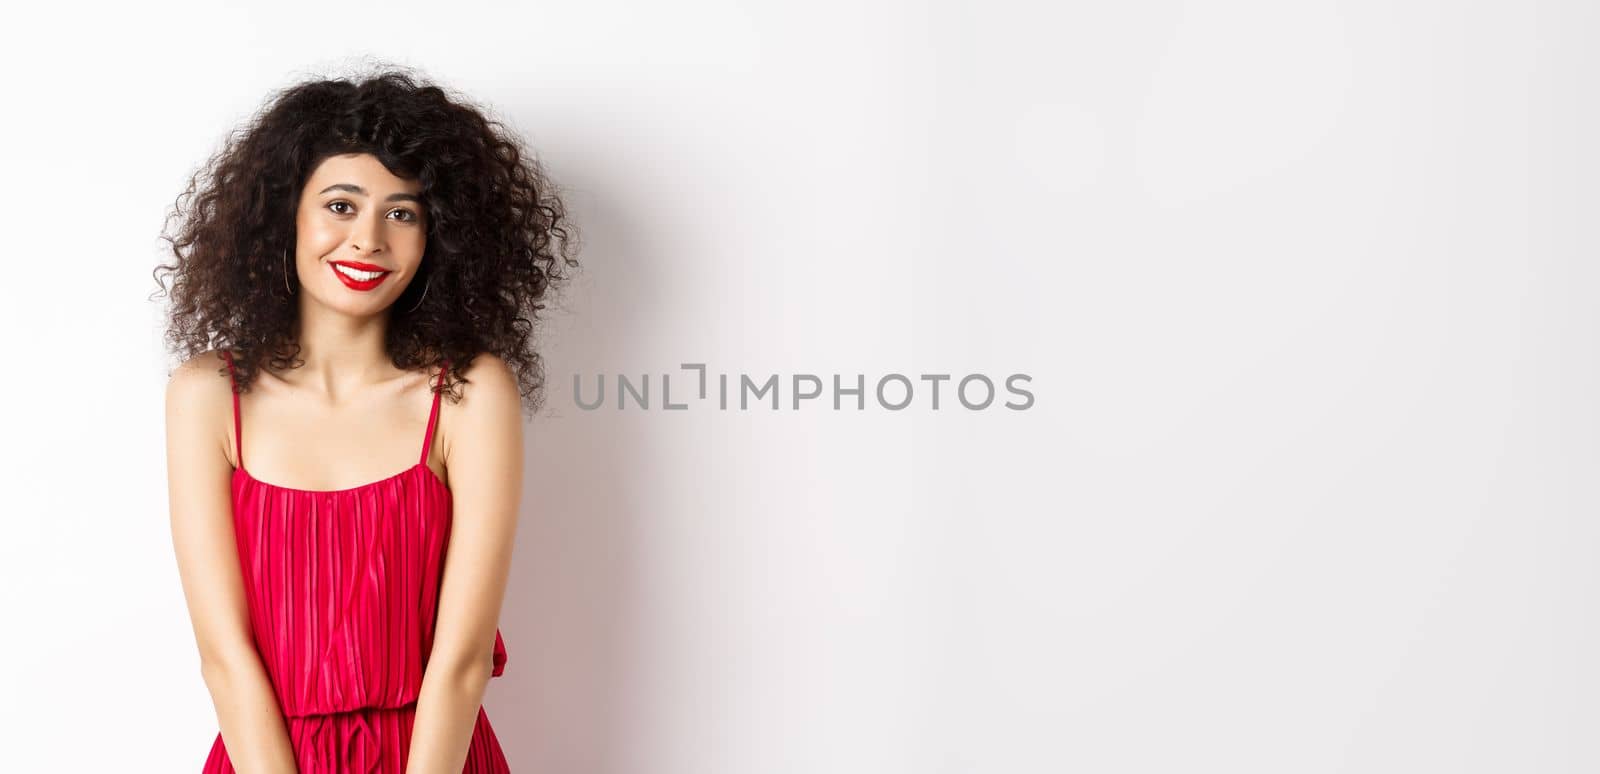 Cute modest lady in red dress and makeup, smiling and blushing, looking at camera, standing over white background.